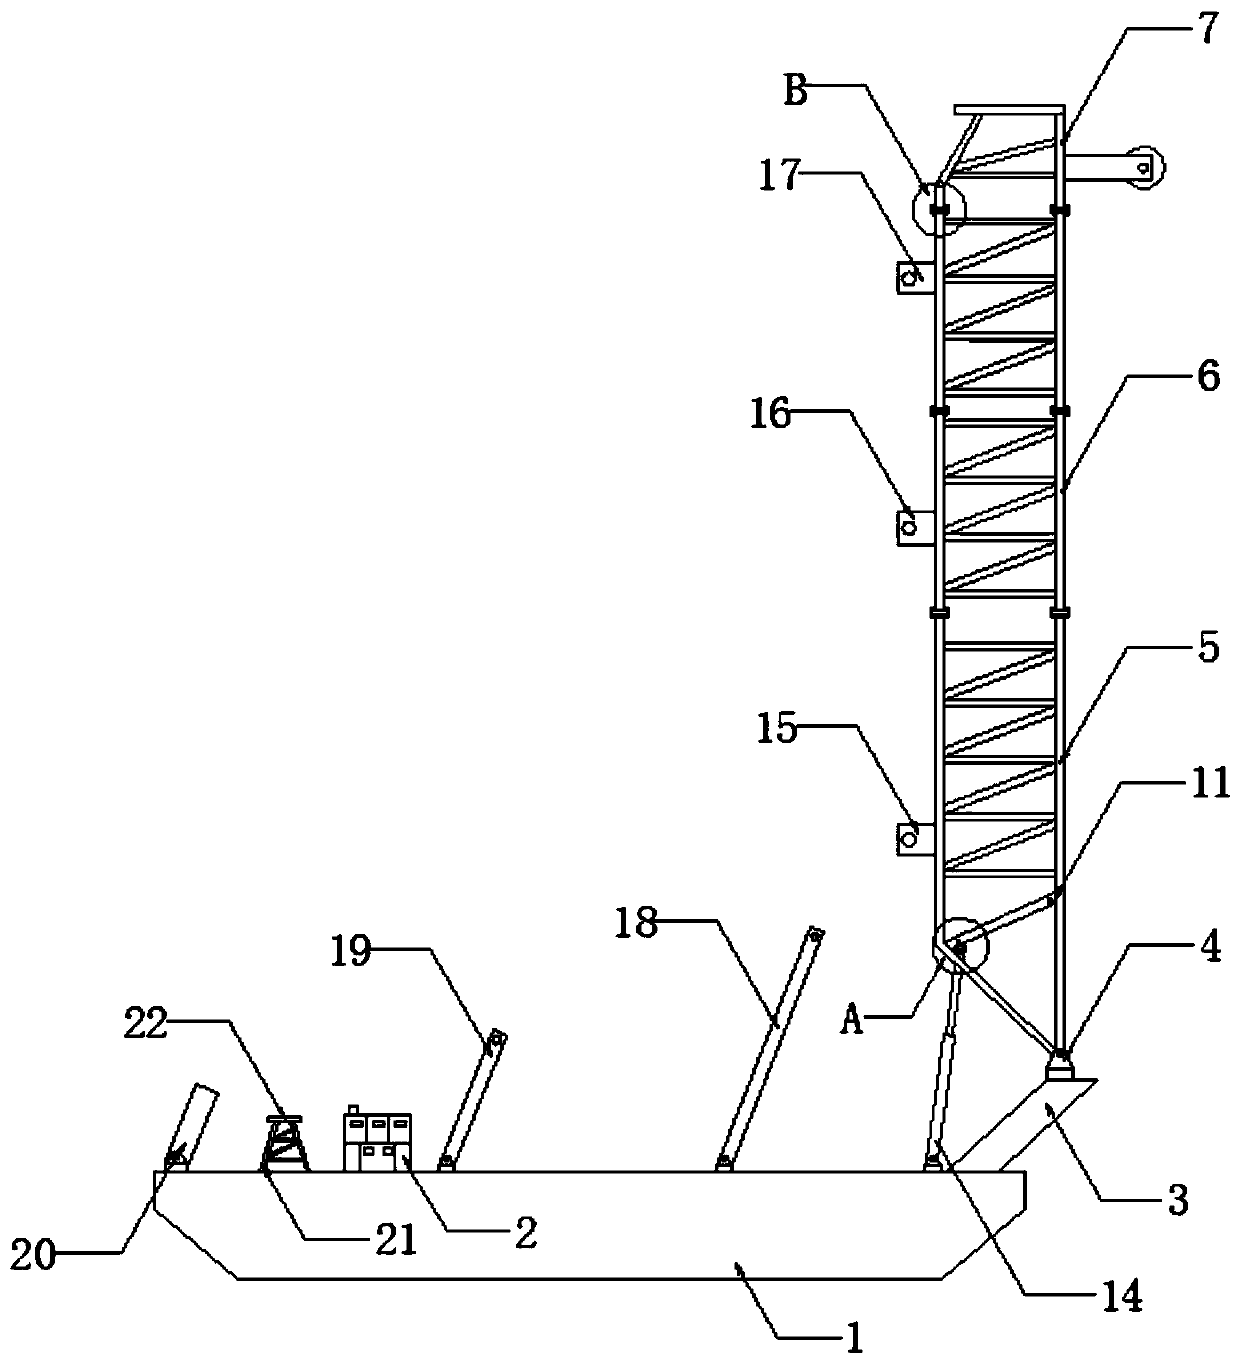 Pile frame system of waterborne detachable multi-positioning pile driving barge